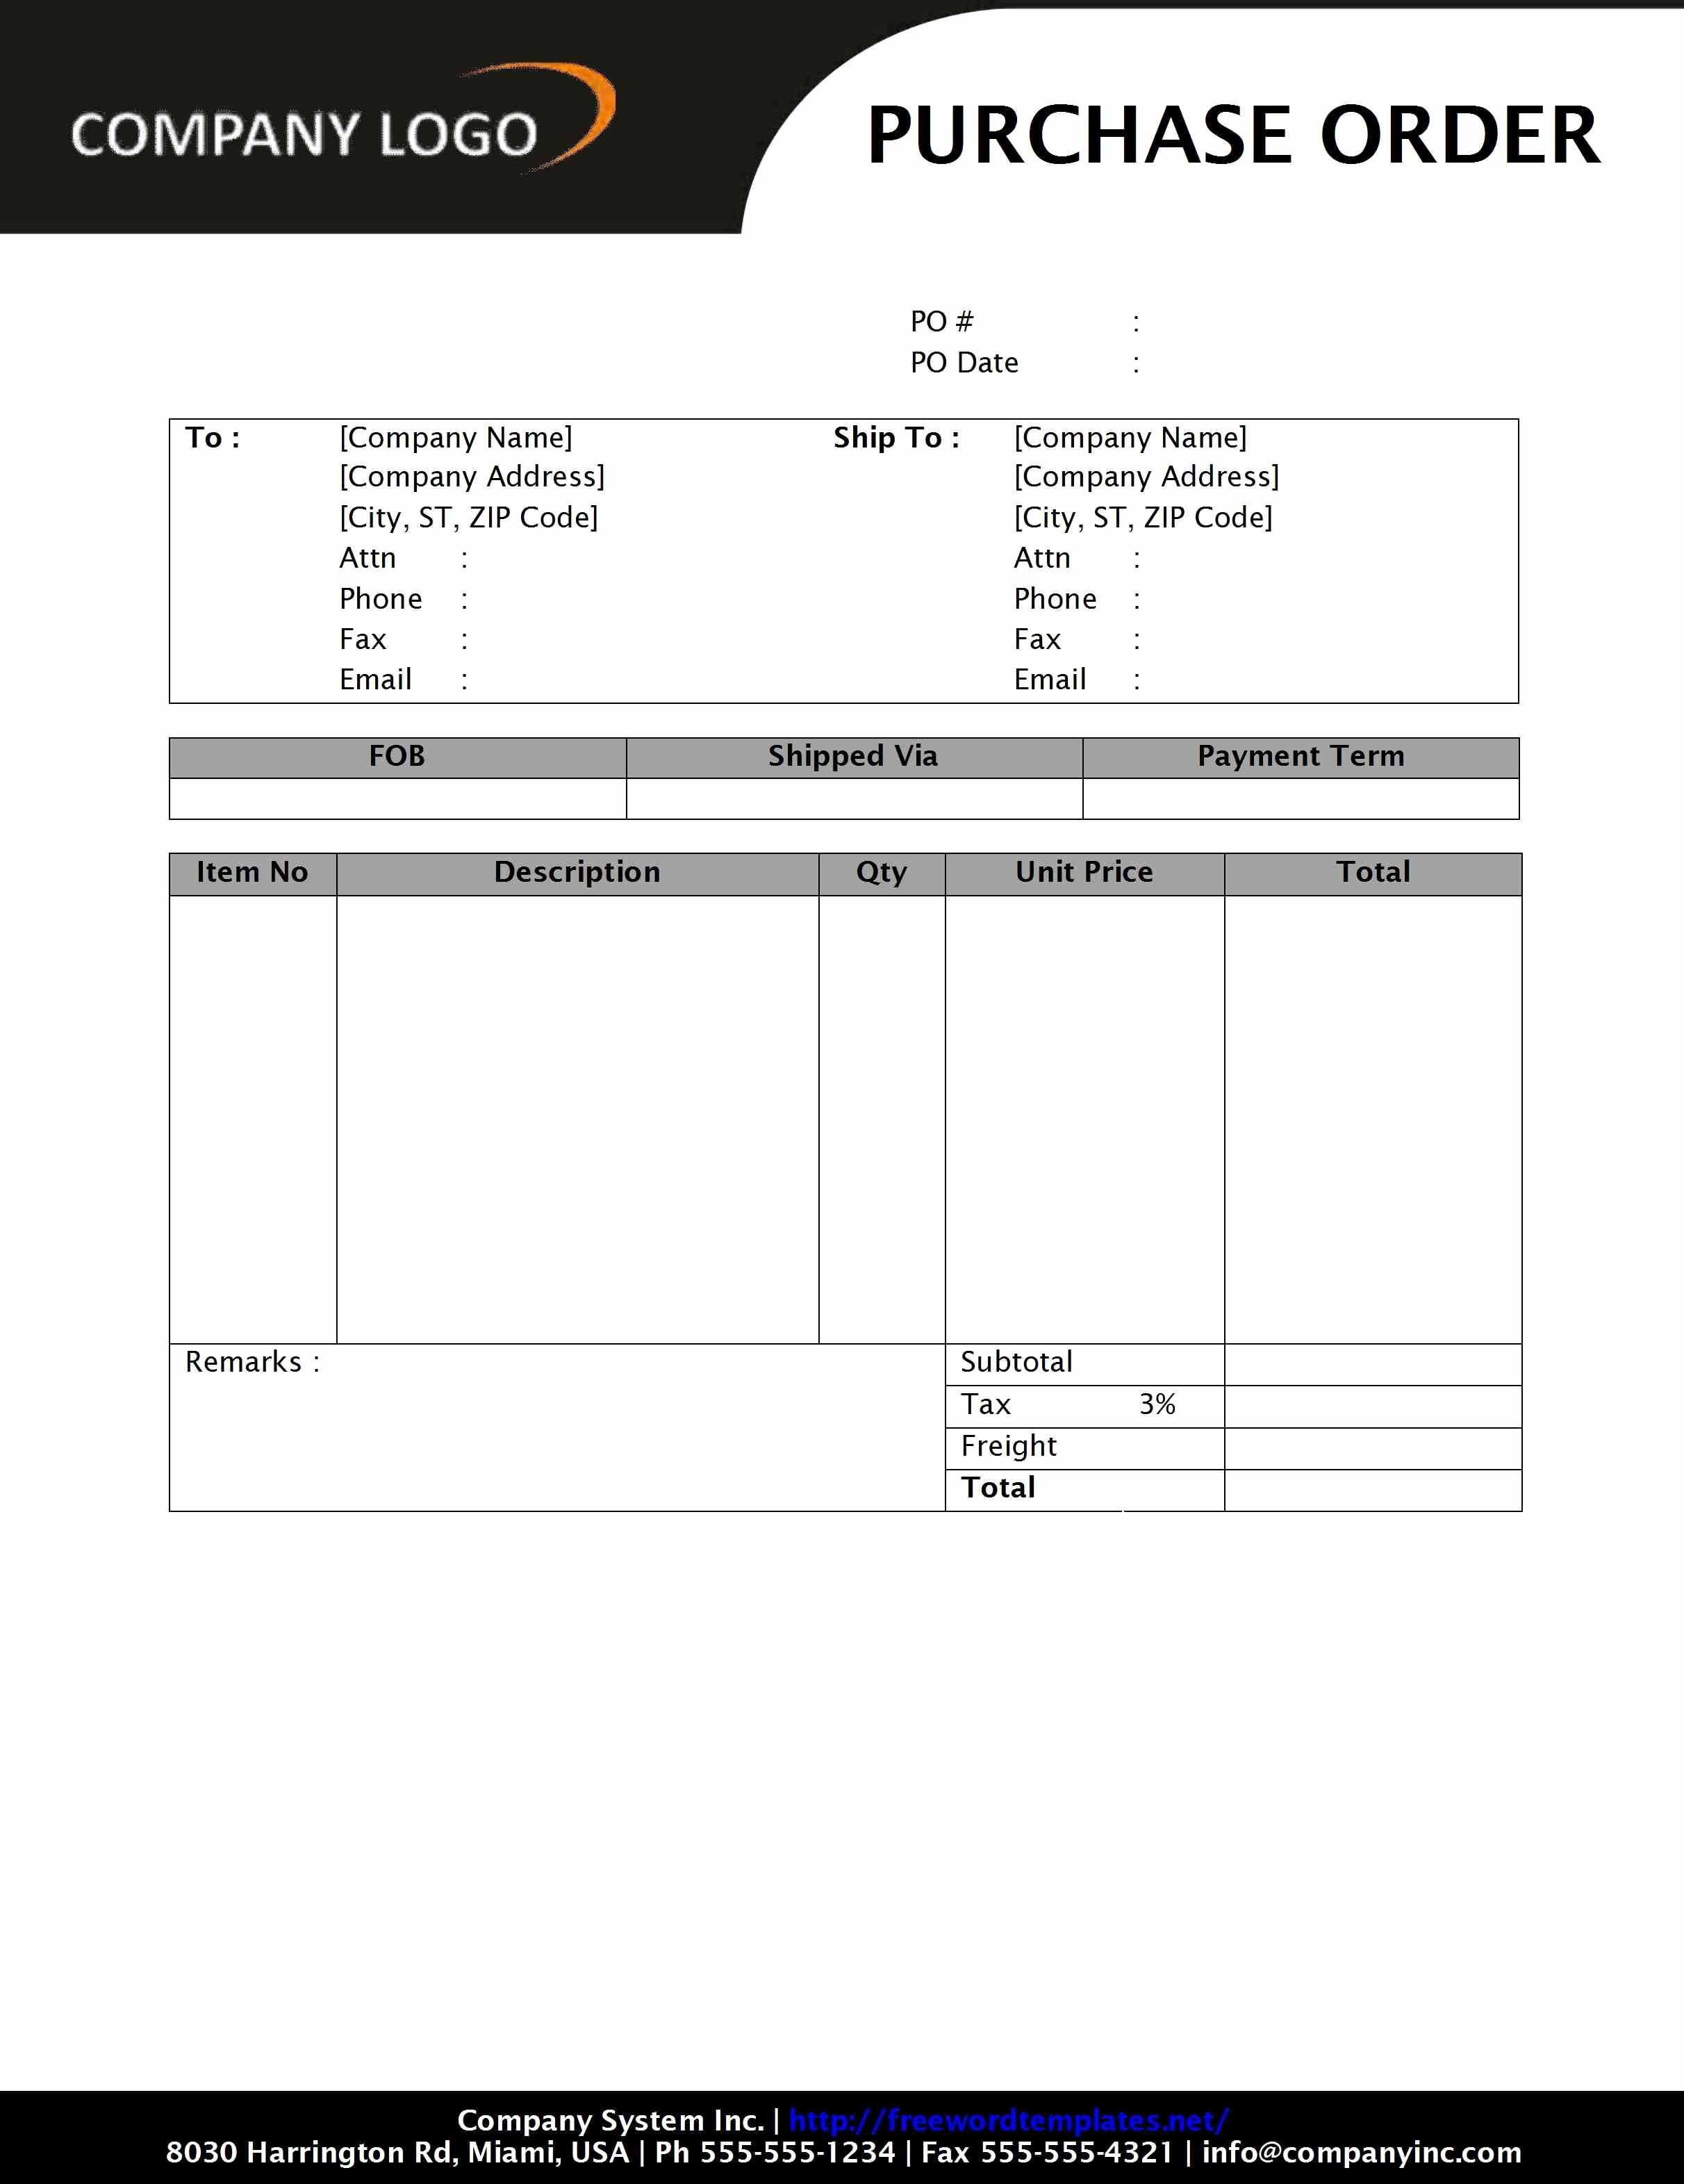 Purchase order Templates Word Best Of Purchase order form Templates for Mac Google Search